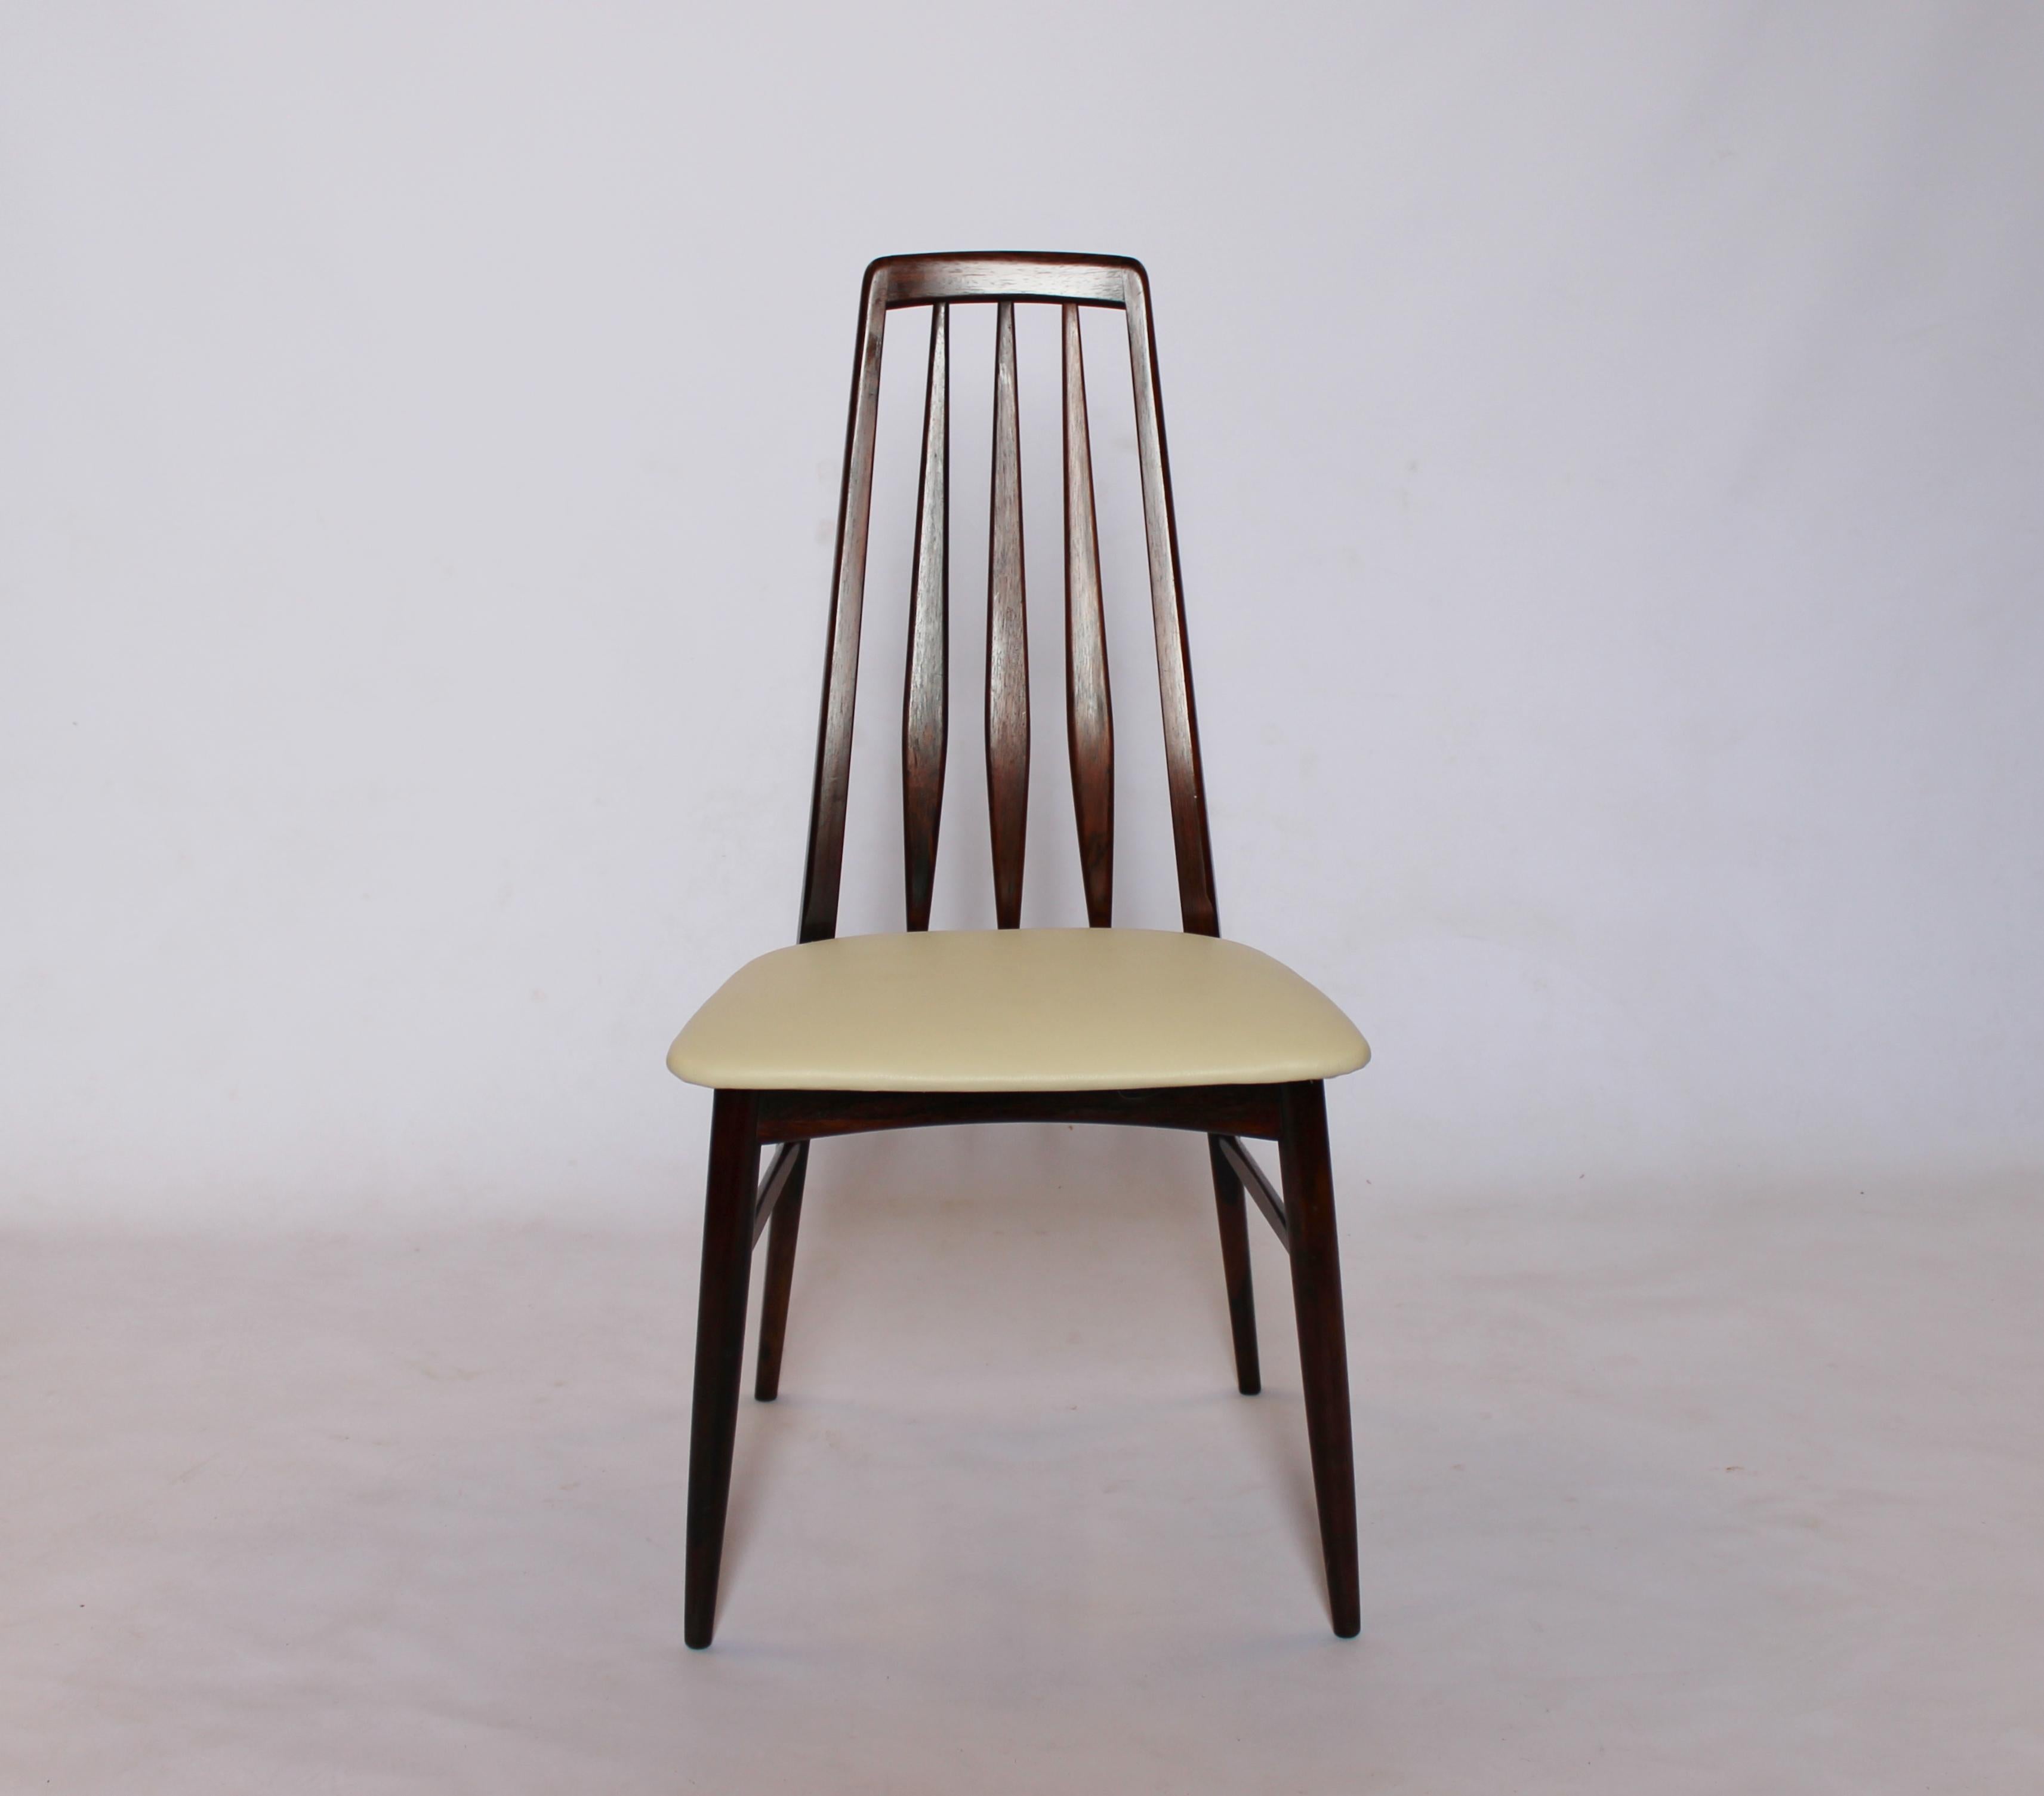 Set of six Eva dining chairs in rosewood and white leather seats designed by Niels Koefoed and manufactured Koefoed Furniture factory, Hornslet in the 1960s. The chairs are in great vintage condition.